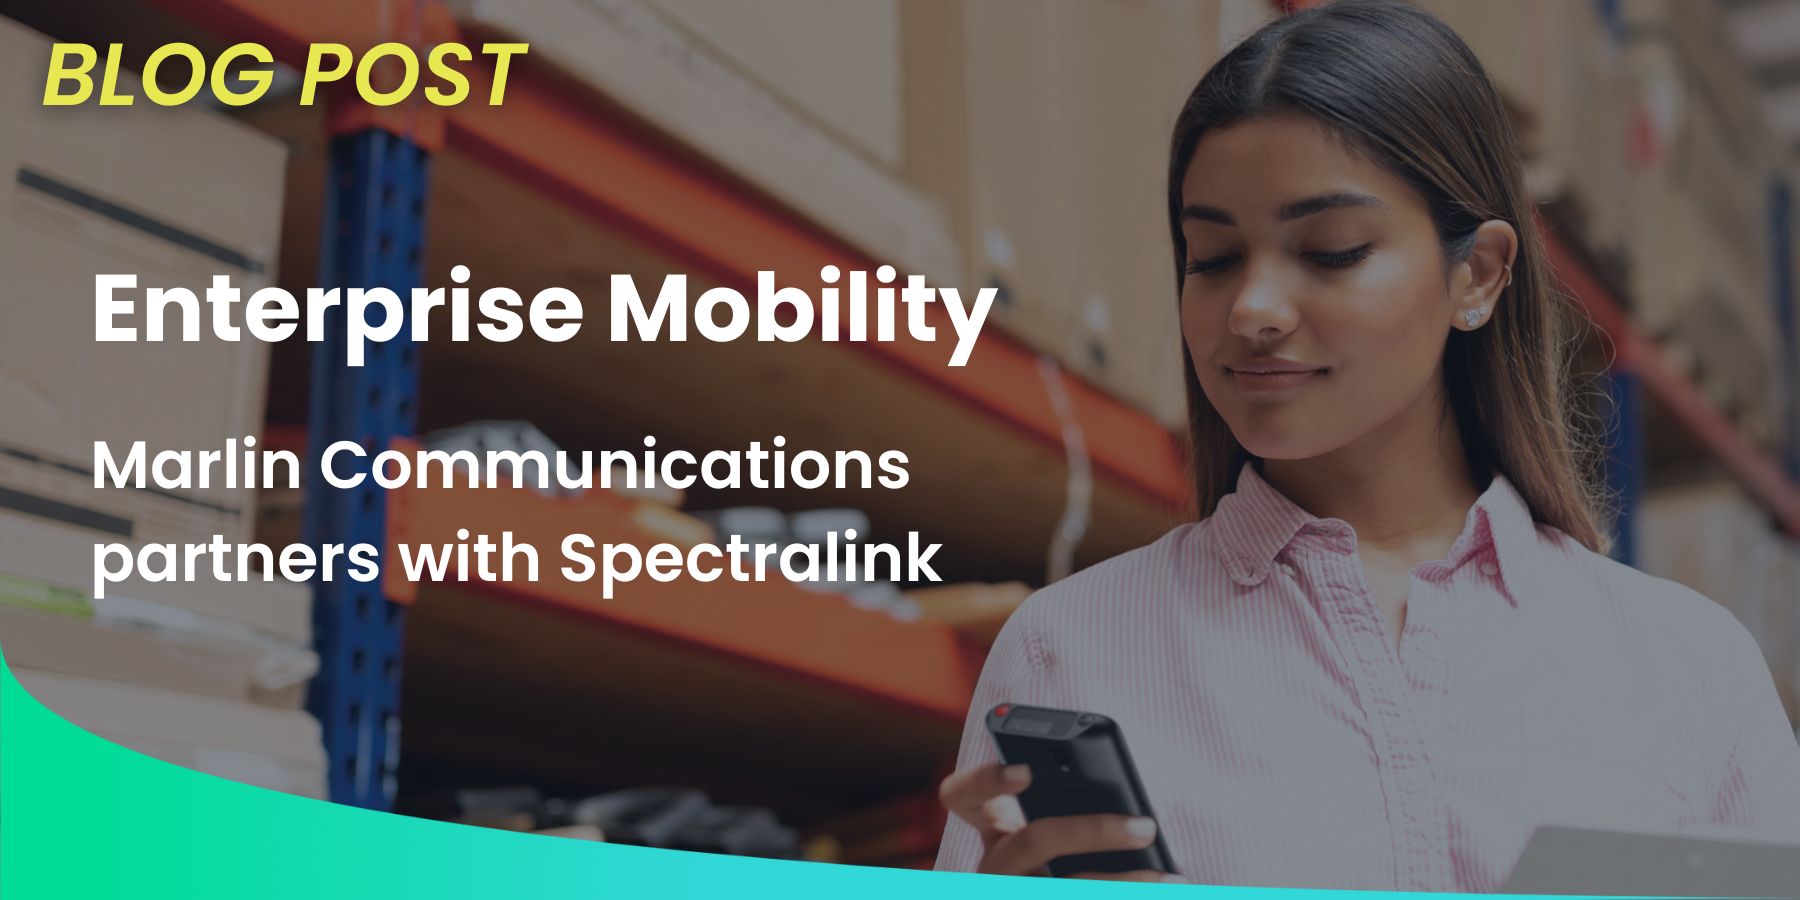 Featured image for “DECT Enterprise Mobility Solutions: Marlin Communications partners with Spectralink”